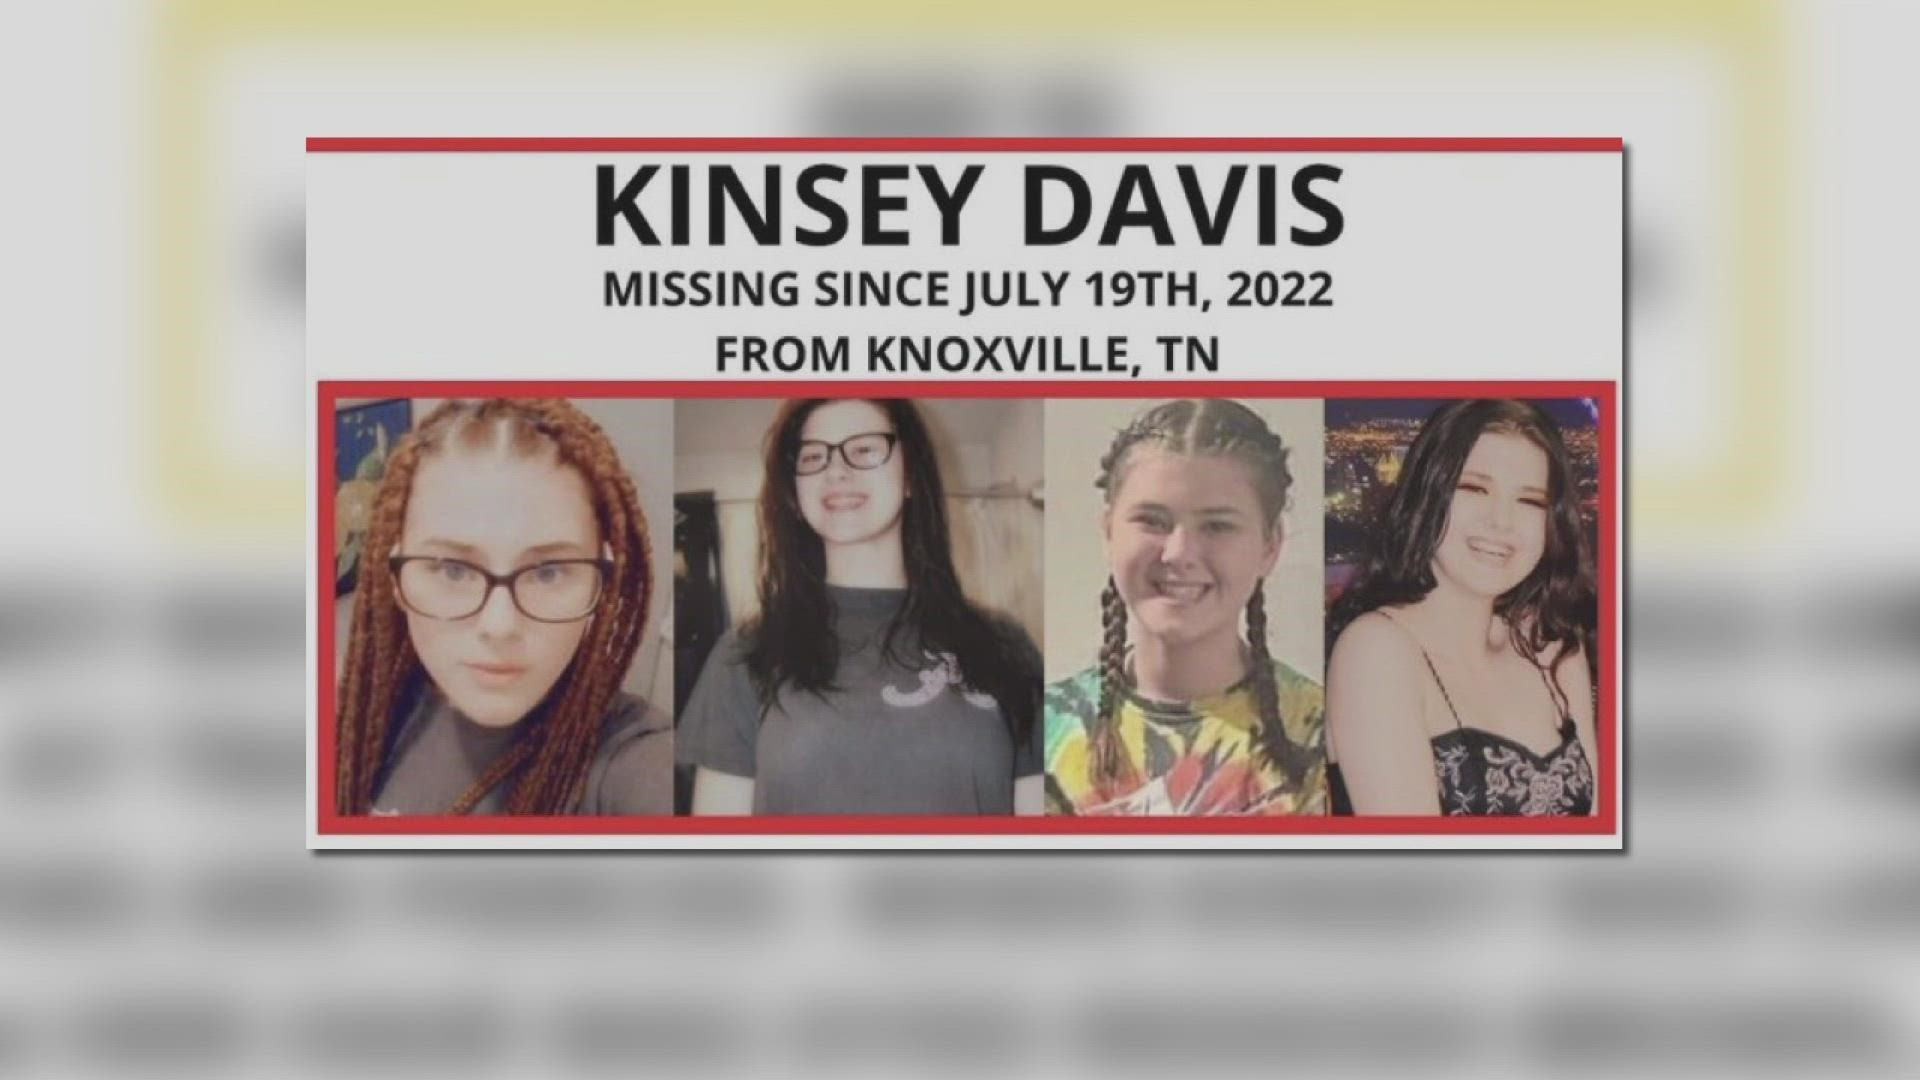 East Tennessee Valley Crime Stoppers said that Kinsey Davis is described to have brown hair and blue eyes, weighs 135lbs., and is 5'8 in height.